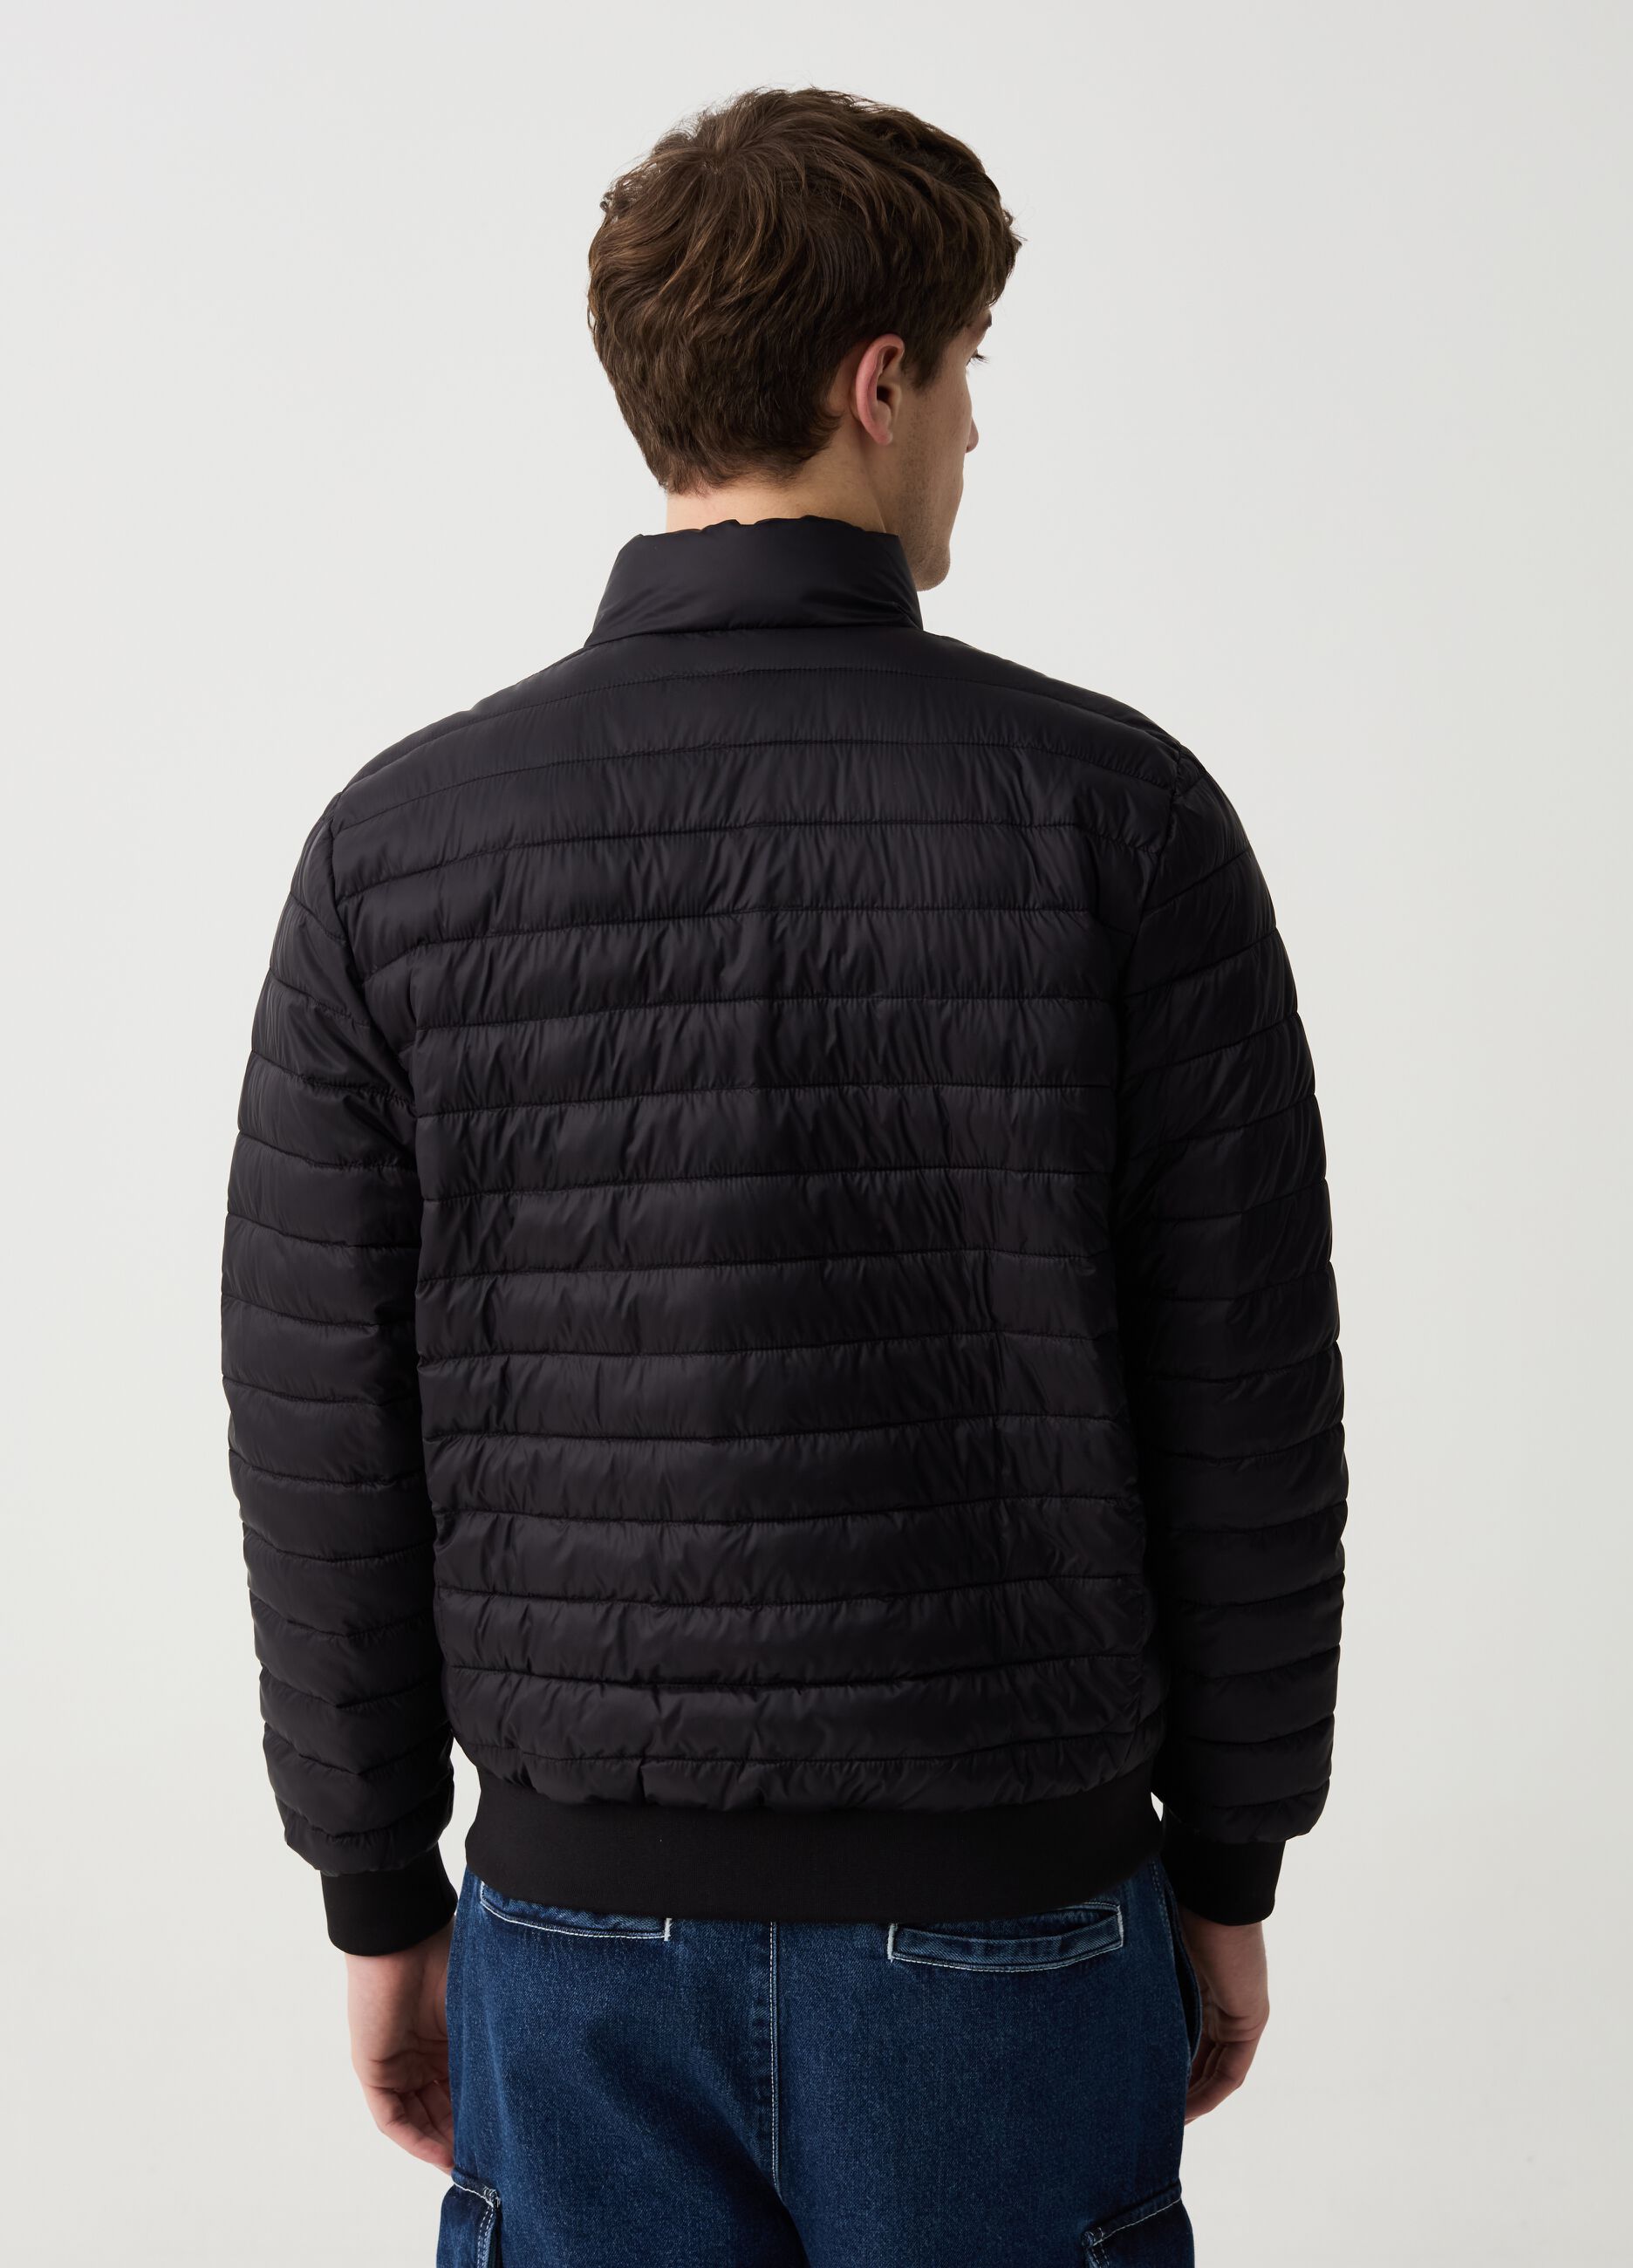 Ultralight quilted down jacket with high neck